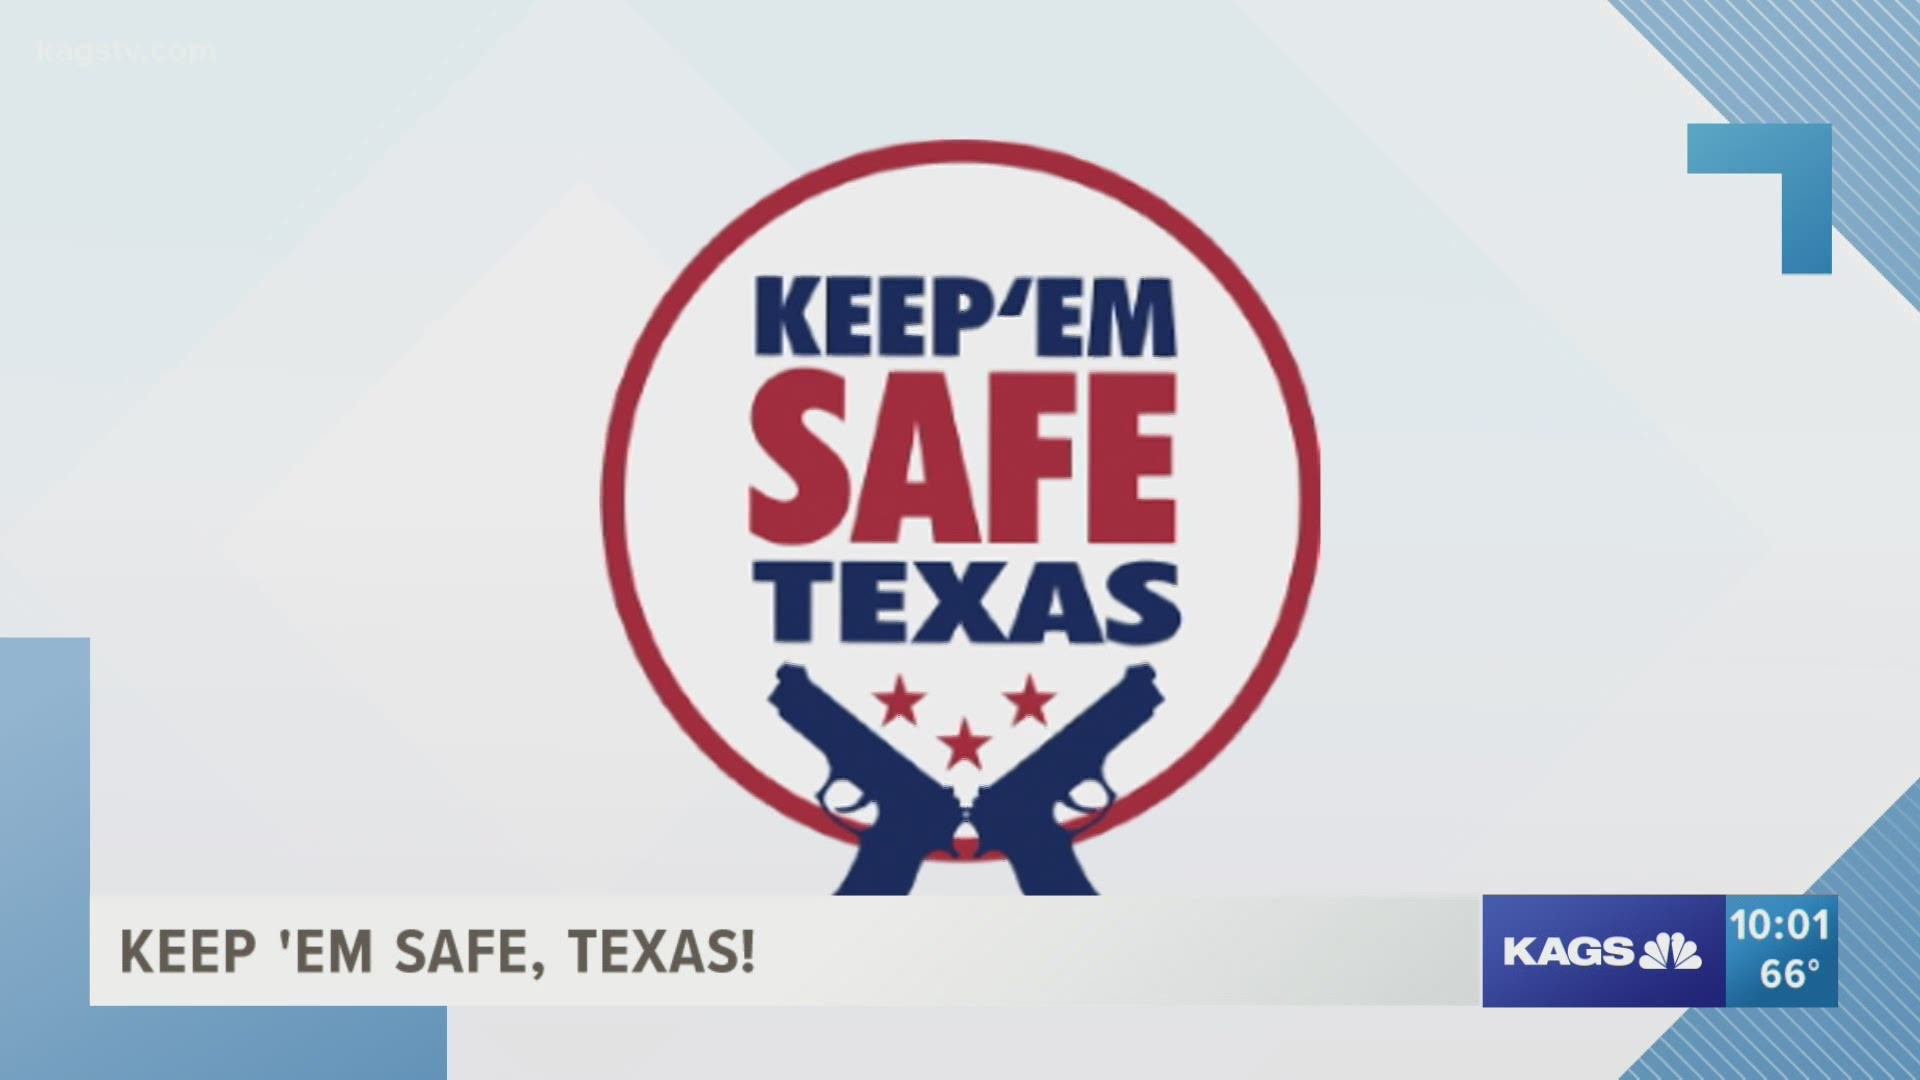 The “KEEP ‘EM SAFE, TEXAS” initiative highlights the importance of storing guns safely.